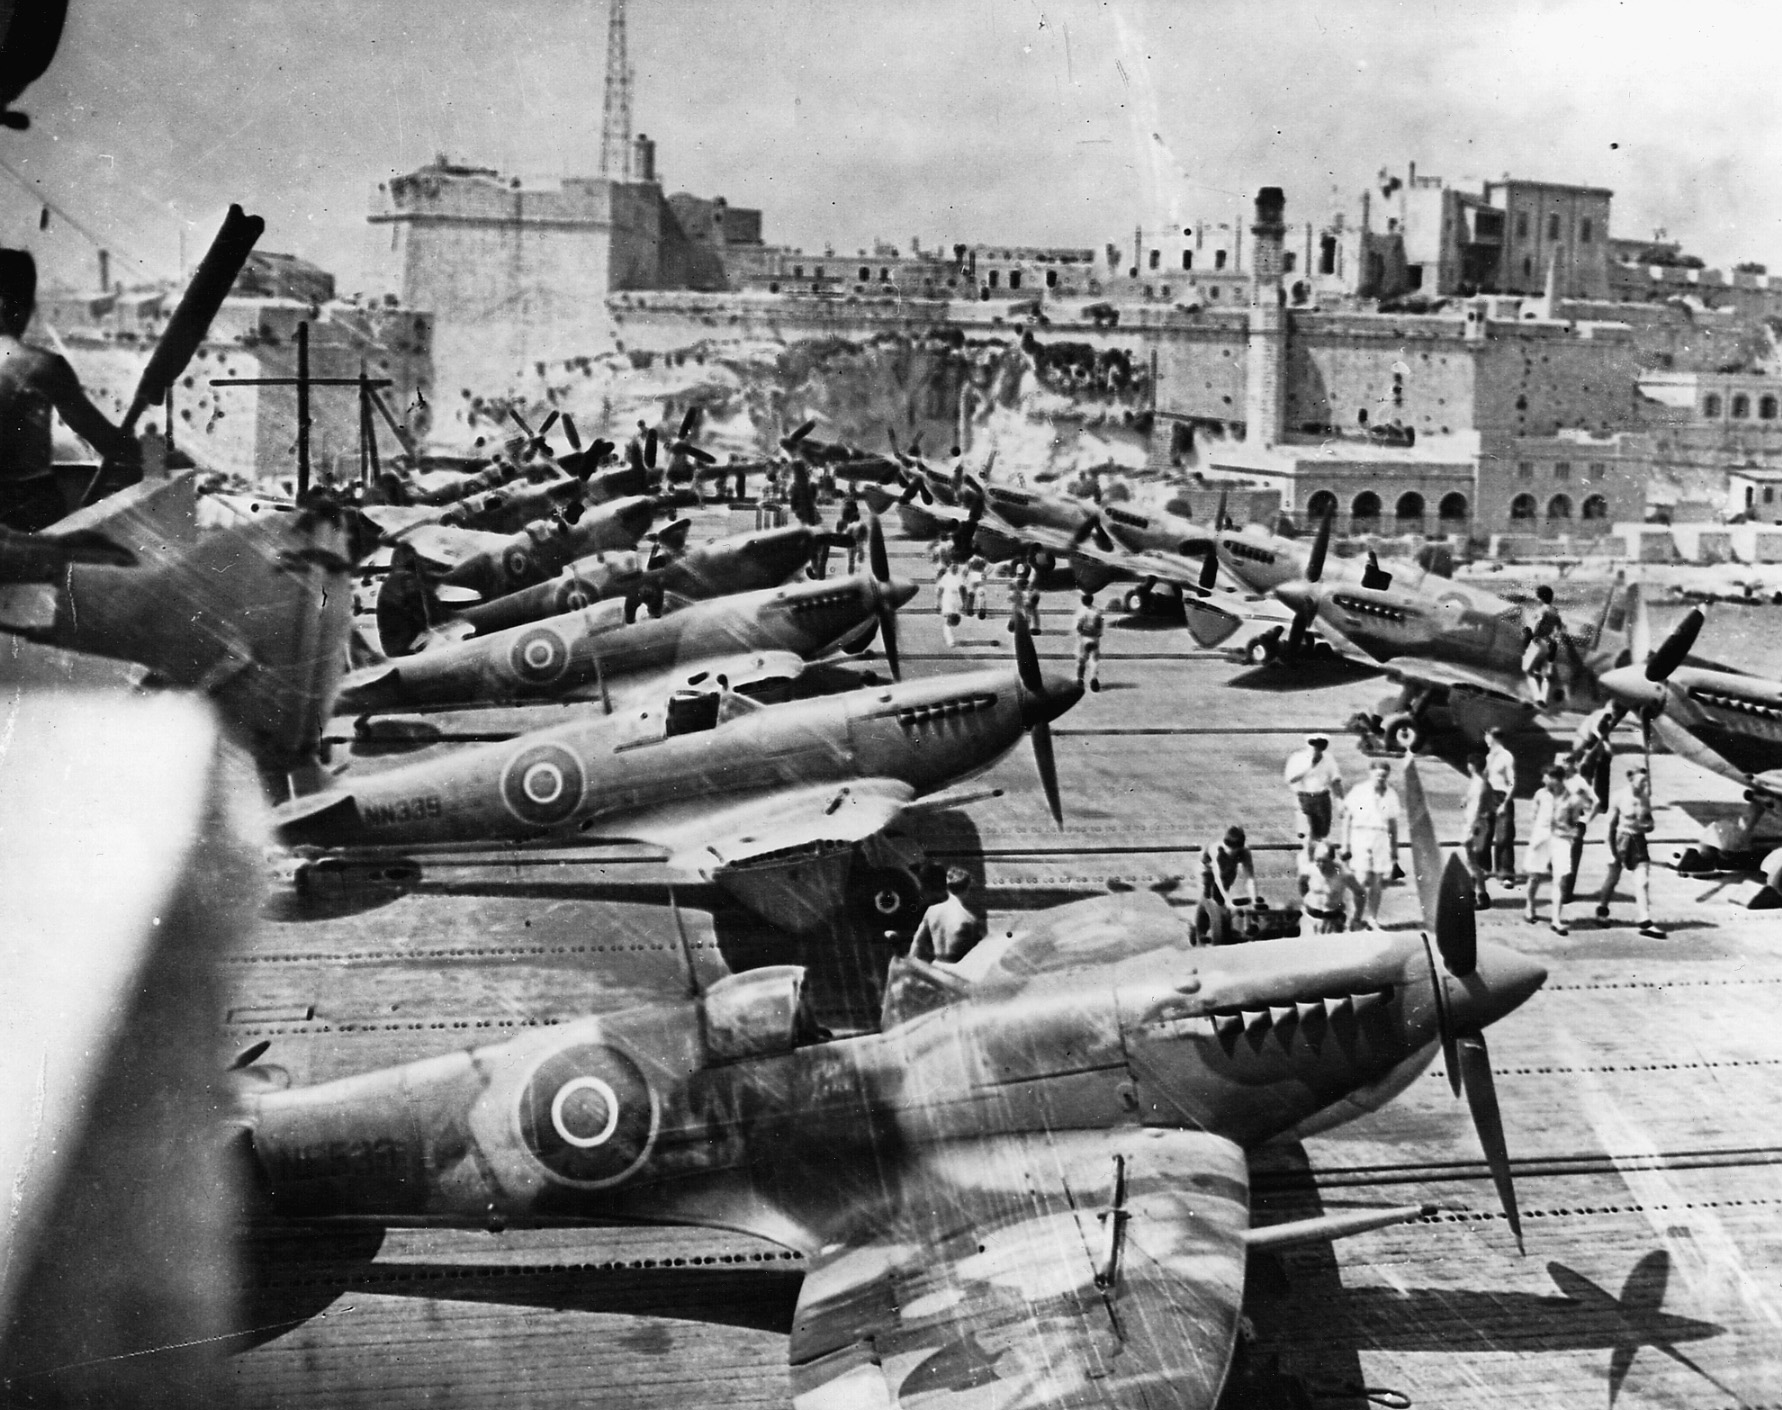 The Wasp’s deck is filled with parked Spitfires as the carrier docks at Malta, May 1942. The Wasp was sunk a few months later in the Pacific by the Japanese. 